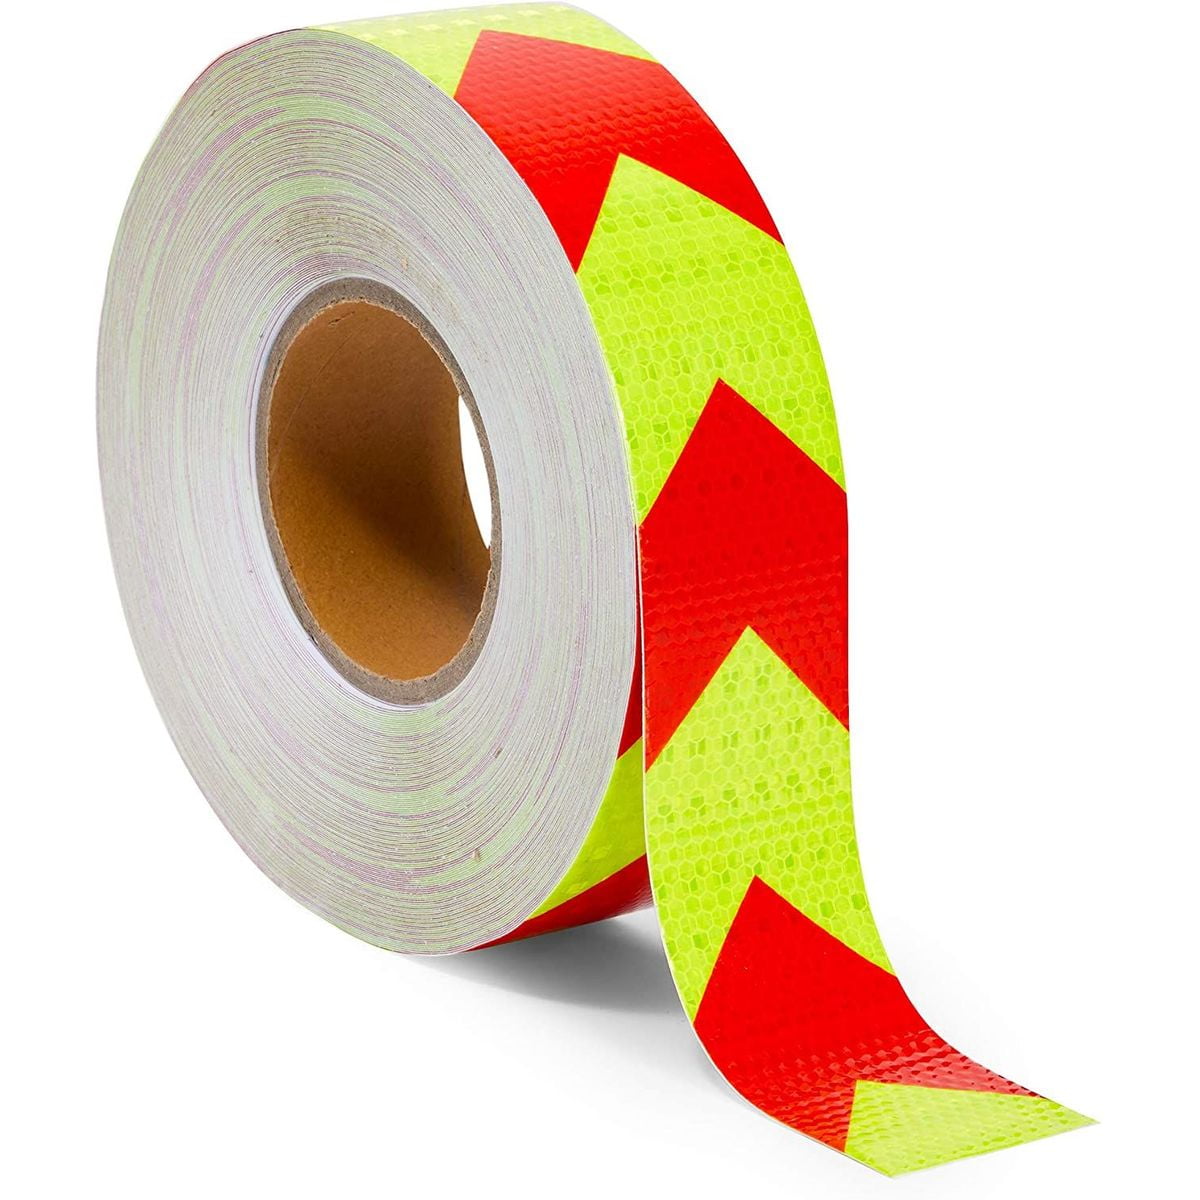 3M Hi-Vis Red Reflective Tape Self-Adhesive for Cars Barrier Trailer Truck 